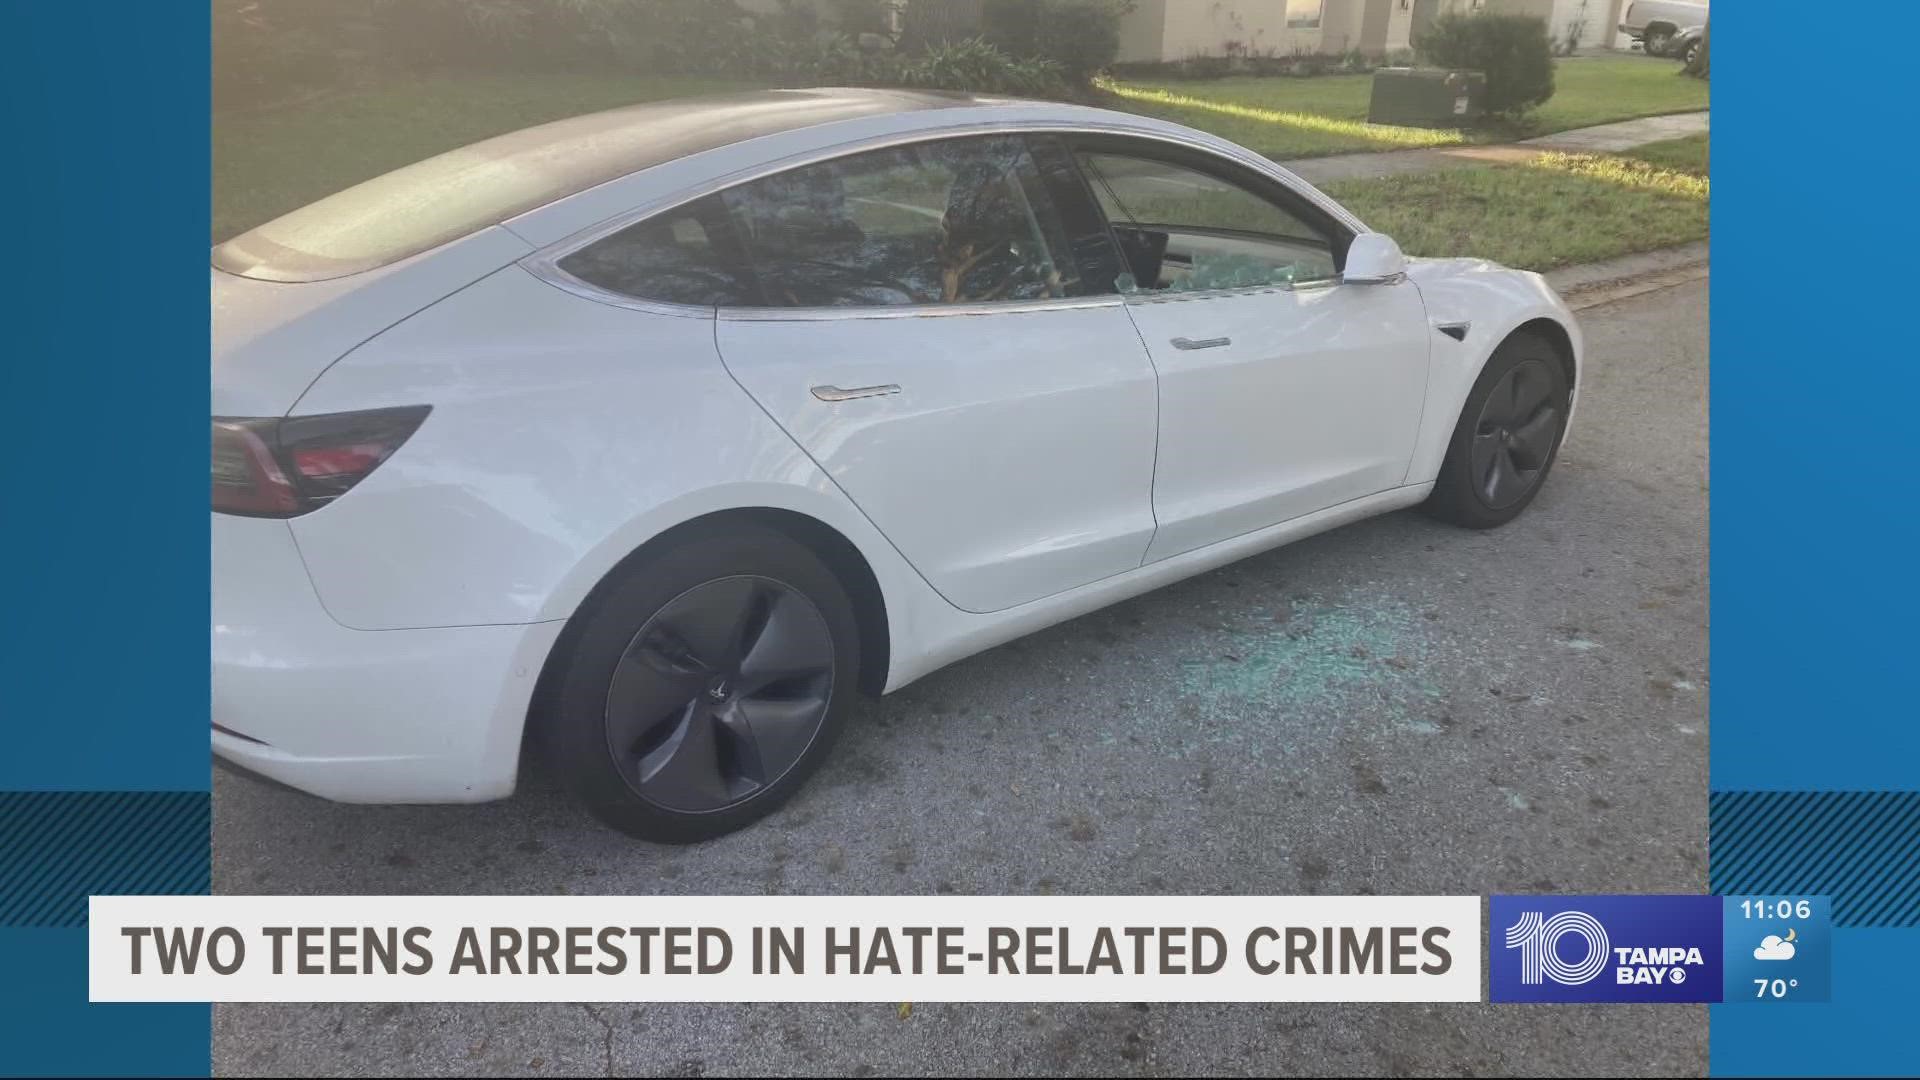 Some of the language written on the cars included racist, antisemitic and homophobic speech, according to the department.